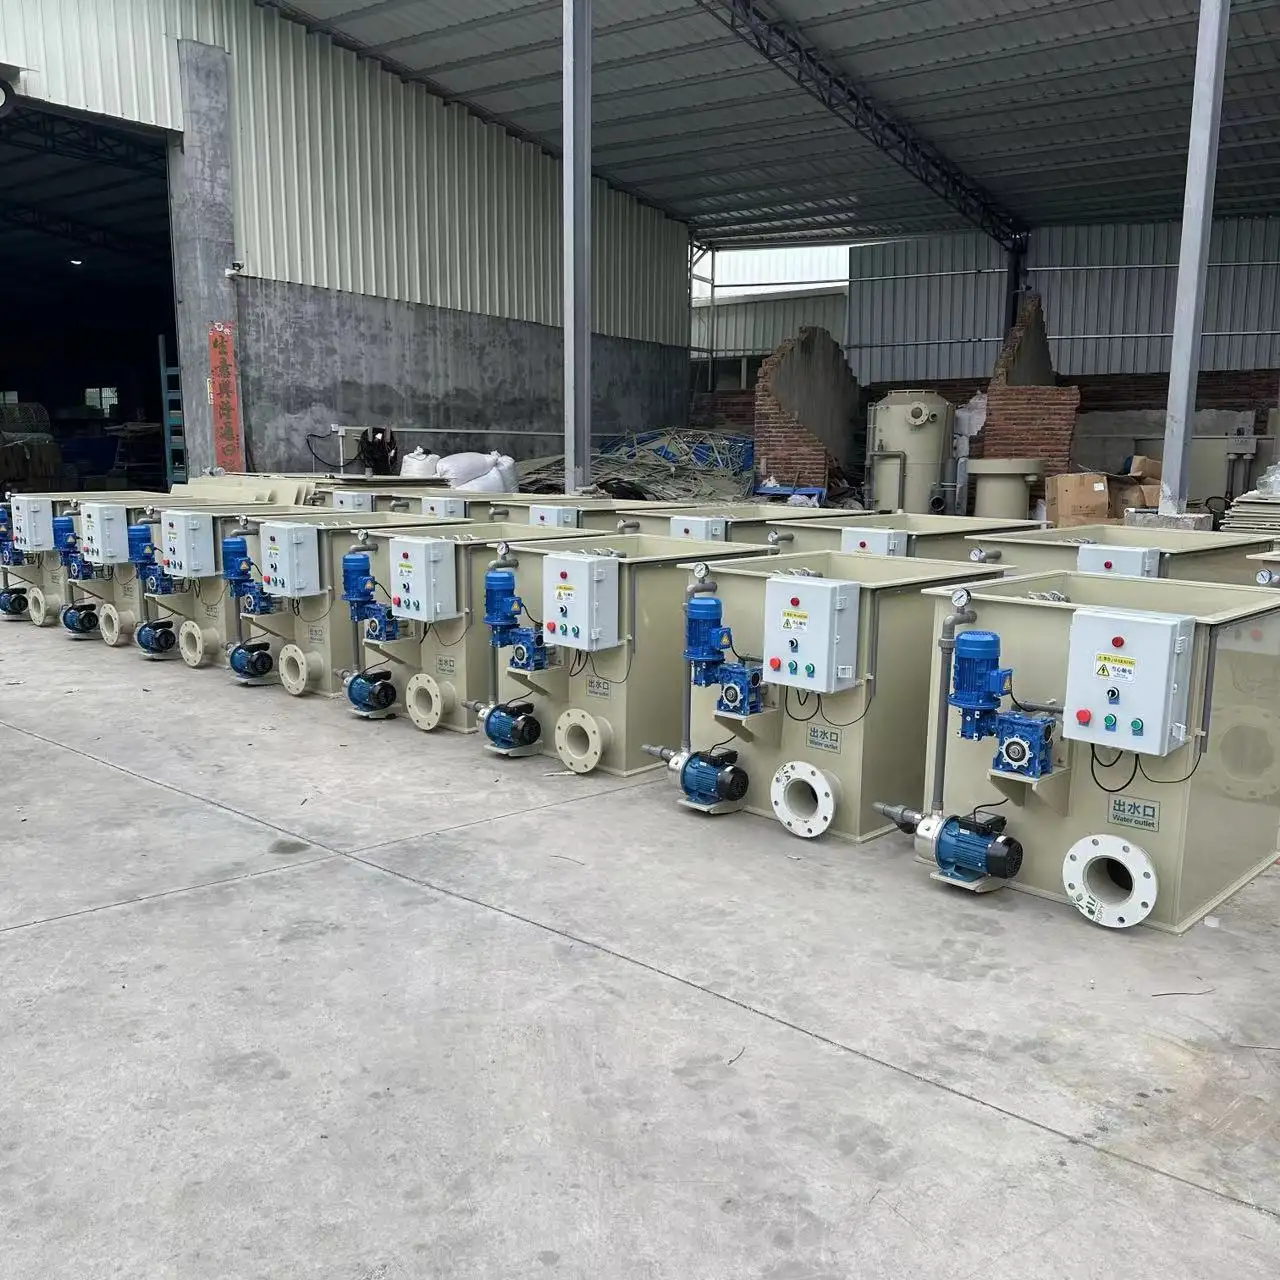 Cowater RDF-200 Rotary Drum Filter 200 m3/h 52800 GPH Pond 70 Microns Drum Filter for Aquaculture Pond